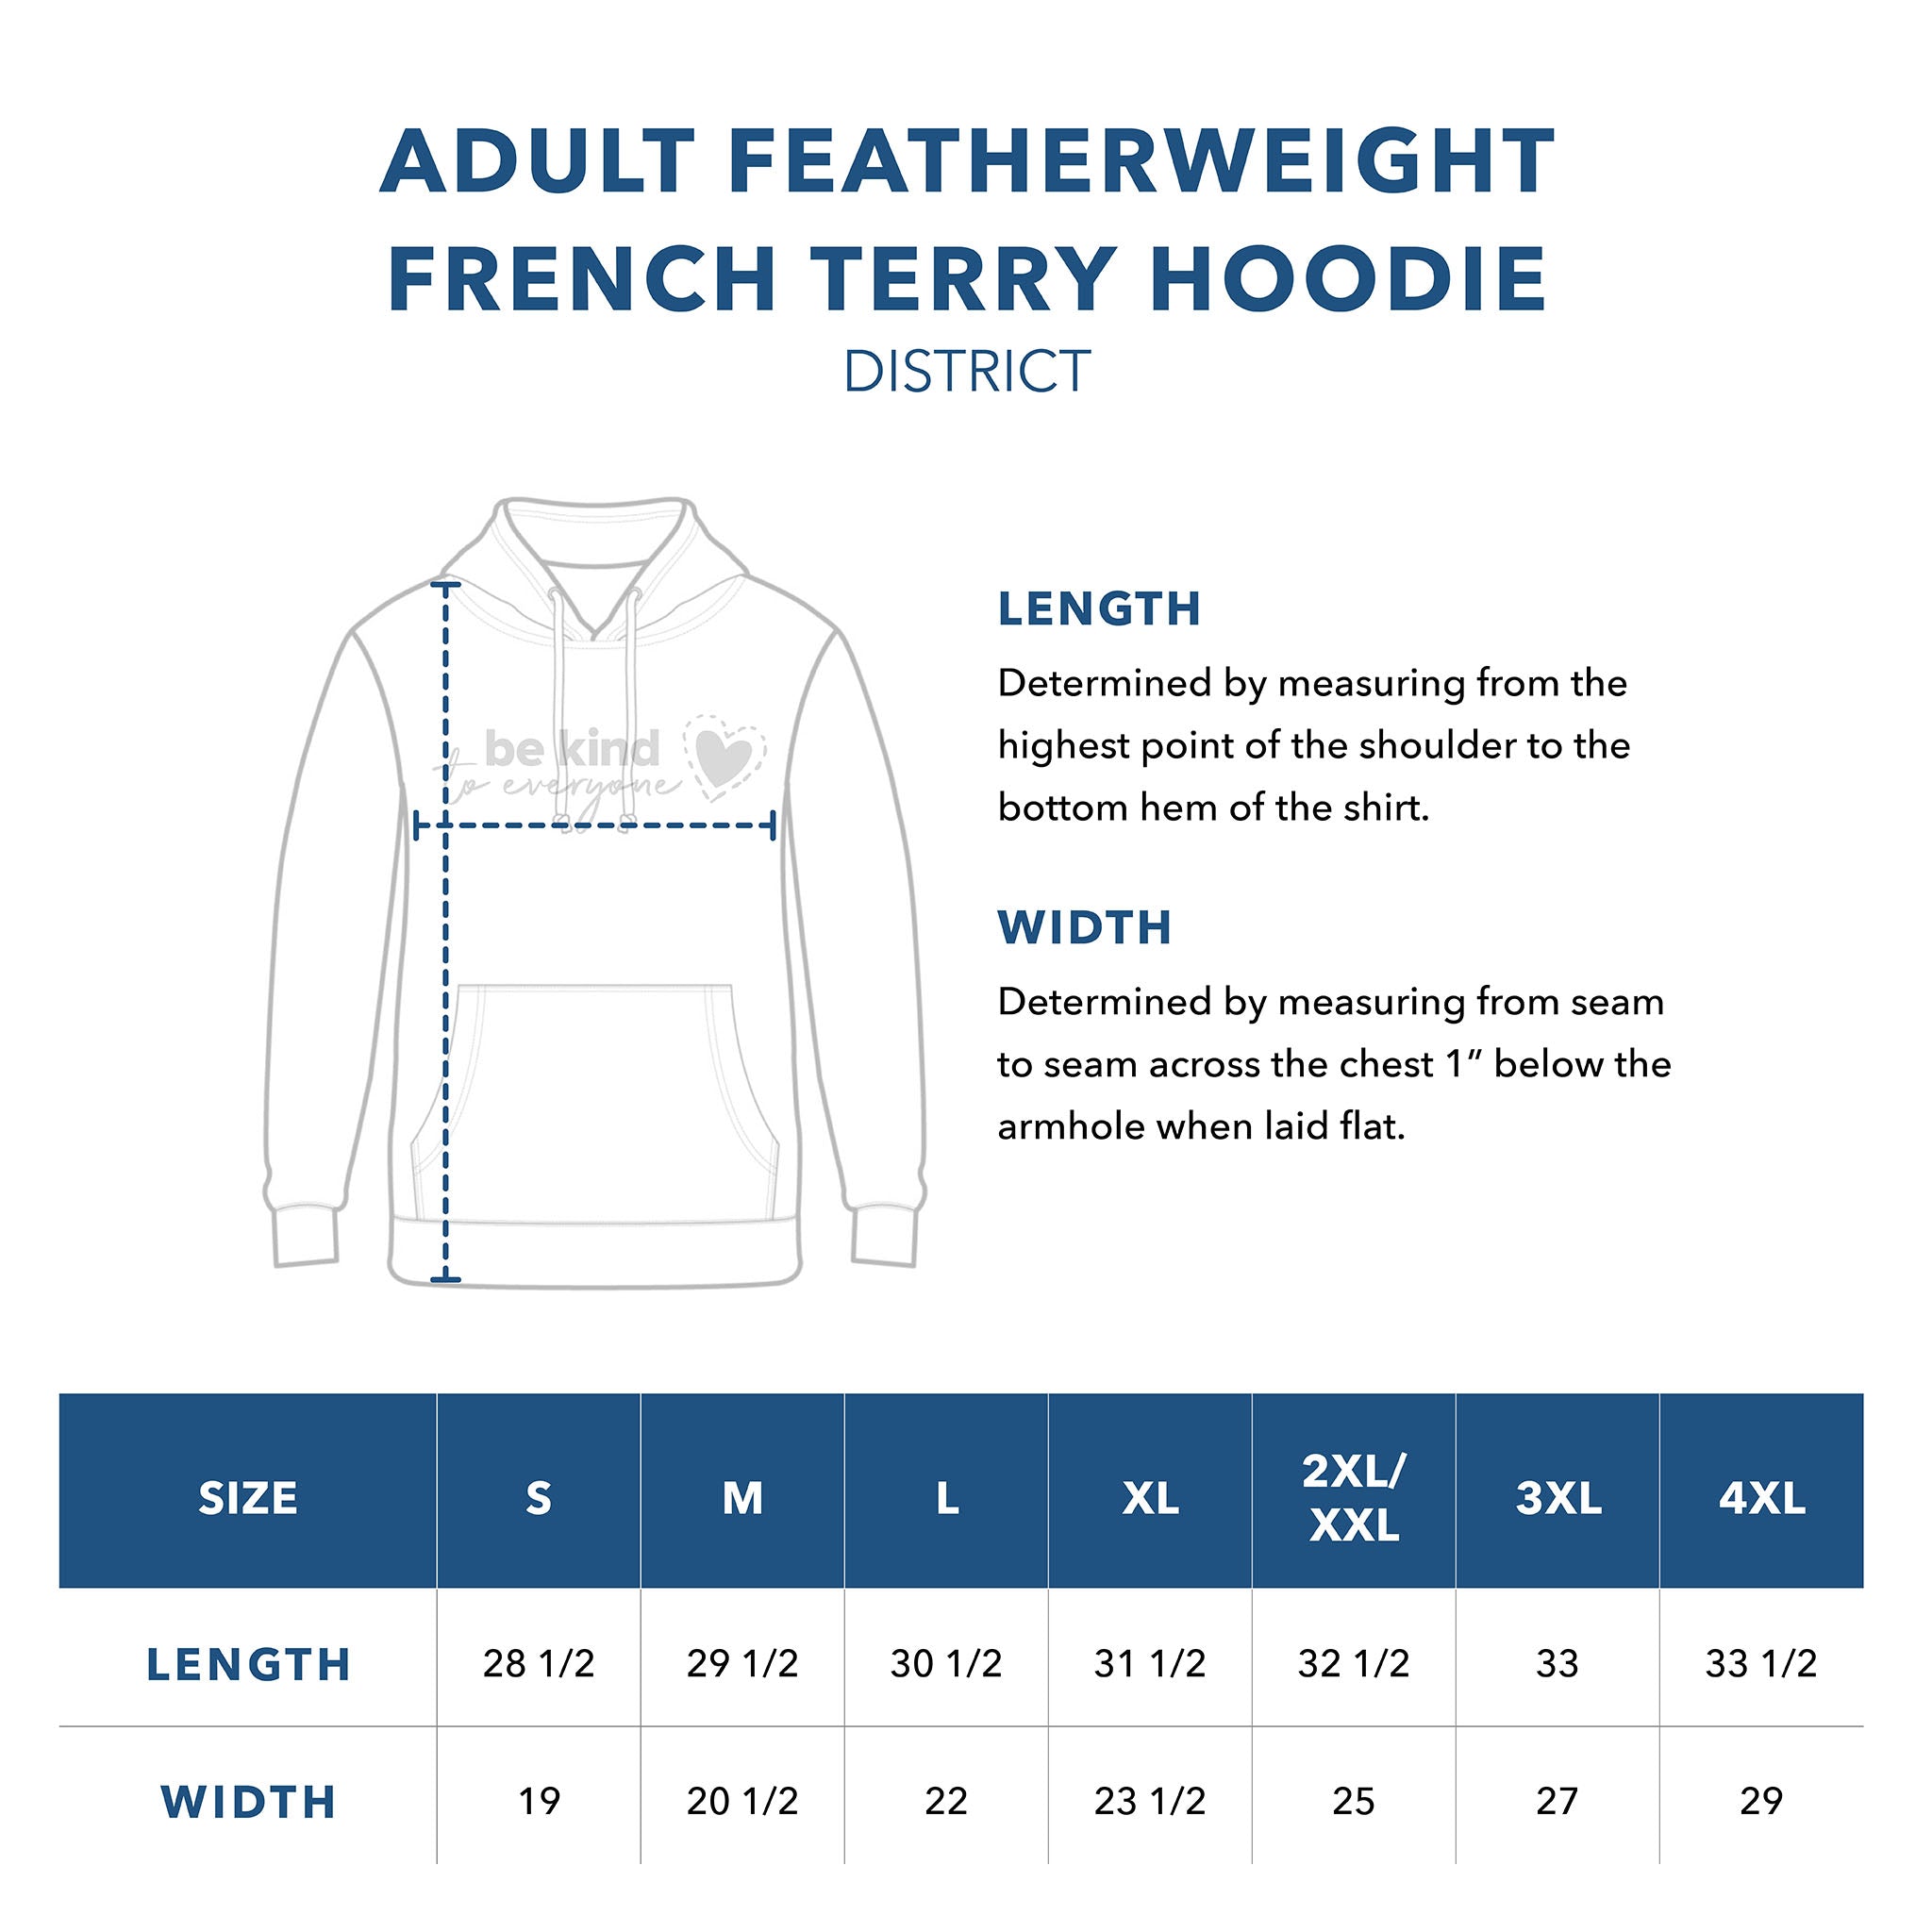 Adult District Featherweight French Terry Hoodie Sizing Guide